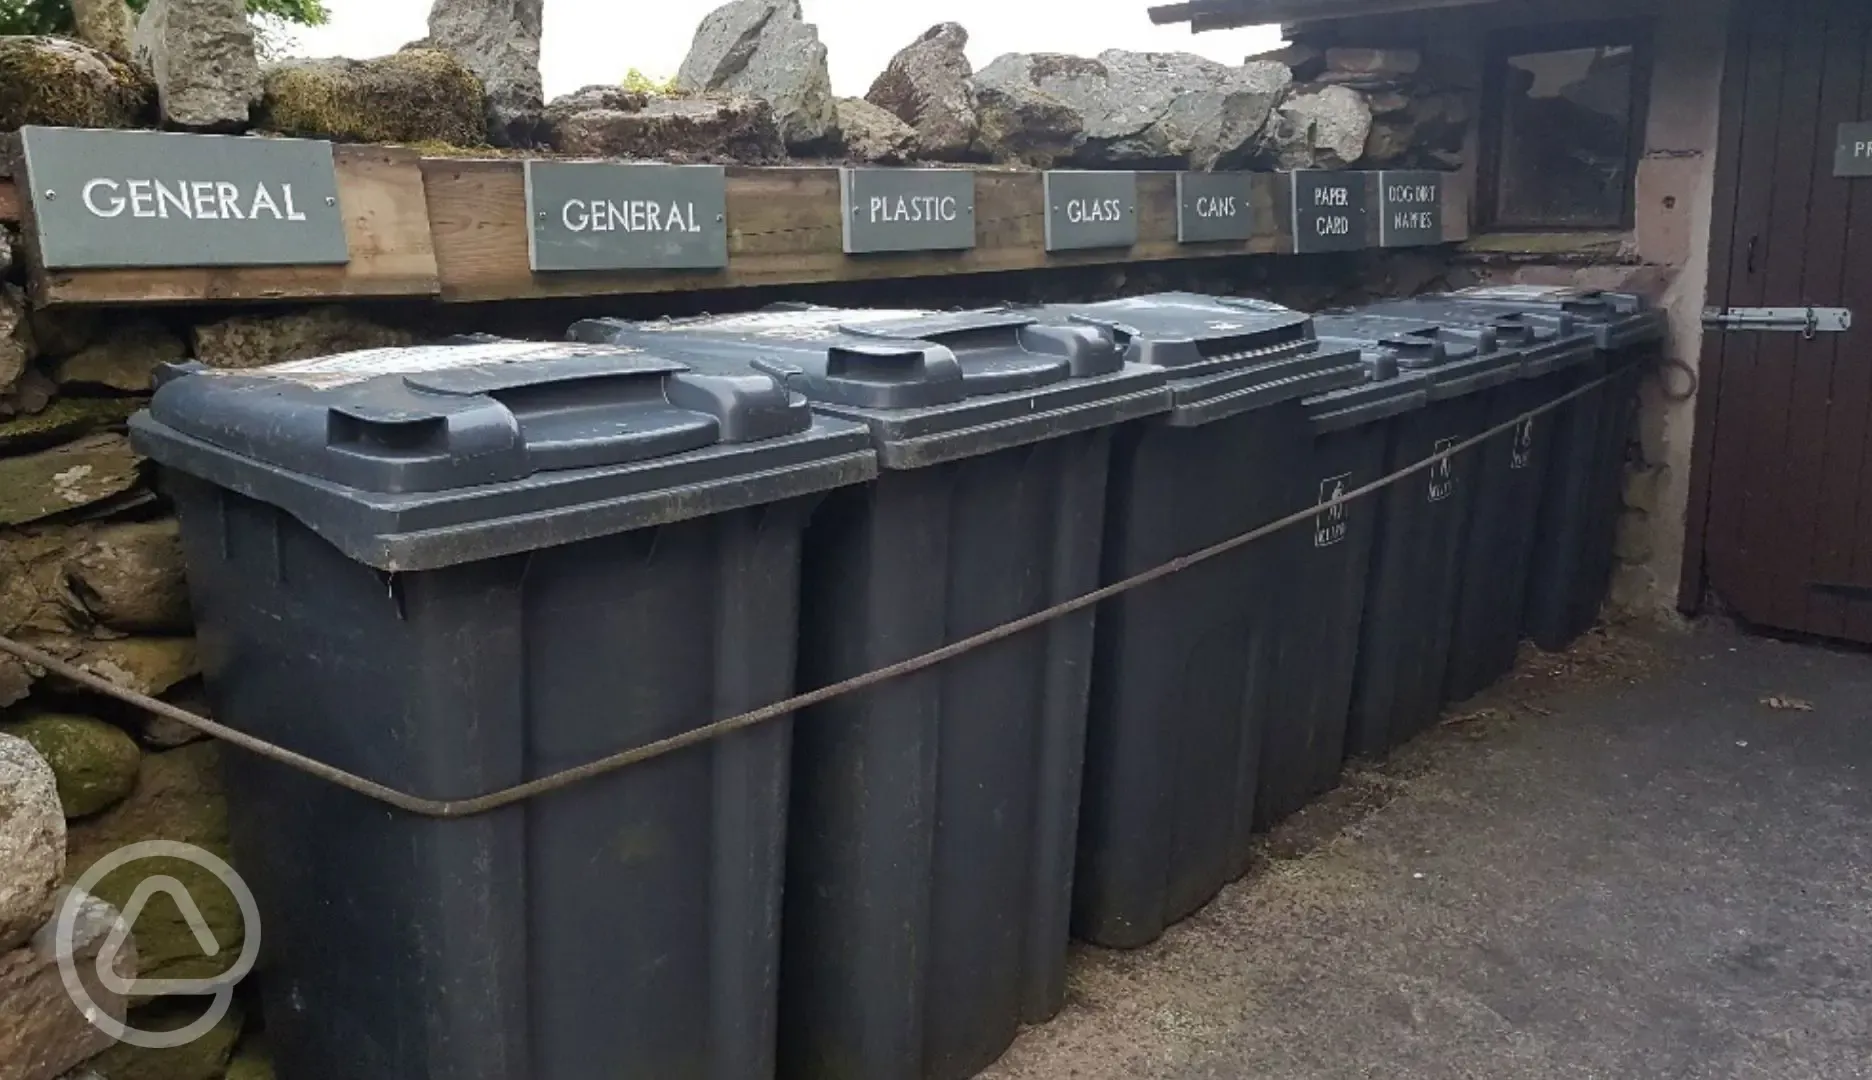 Waste collection facilities